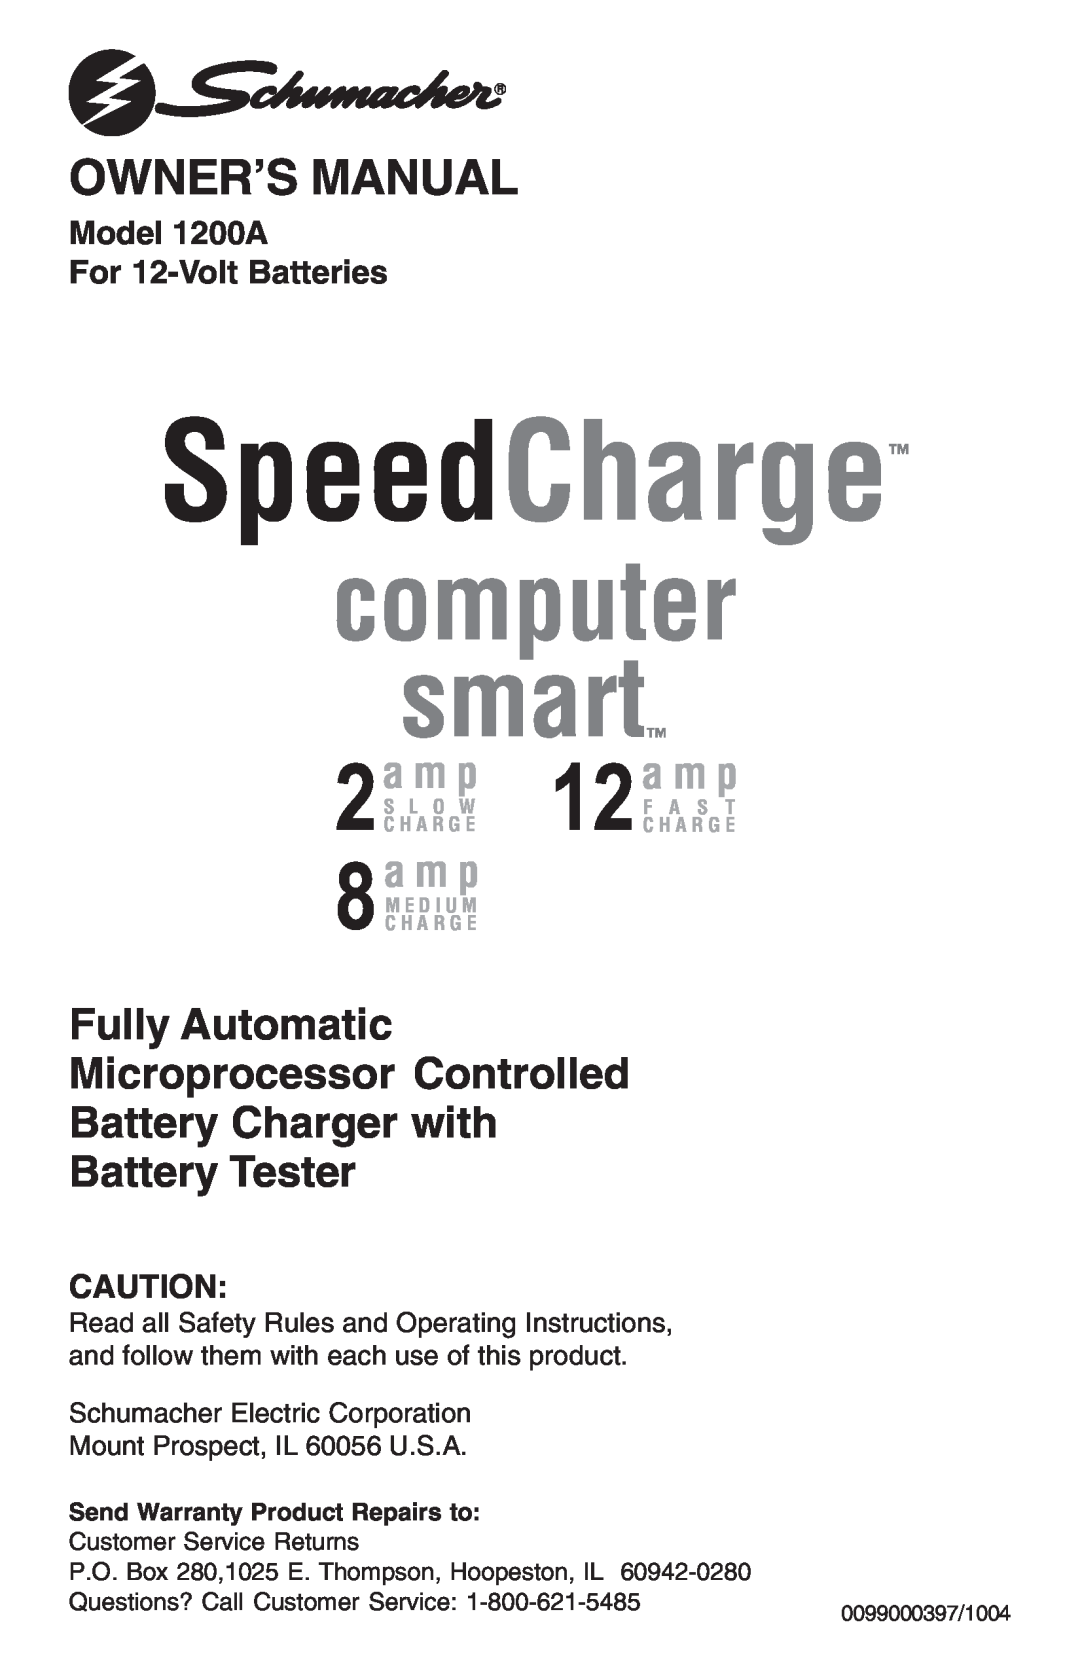 Schumacher 1200A owner manual Send Warranty Product Repairs to, SpeedCharge, computer smart, Owner’S Manual, a m p 